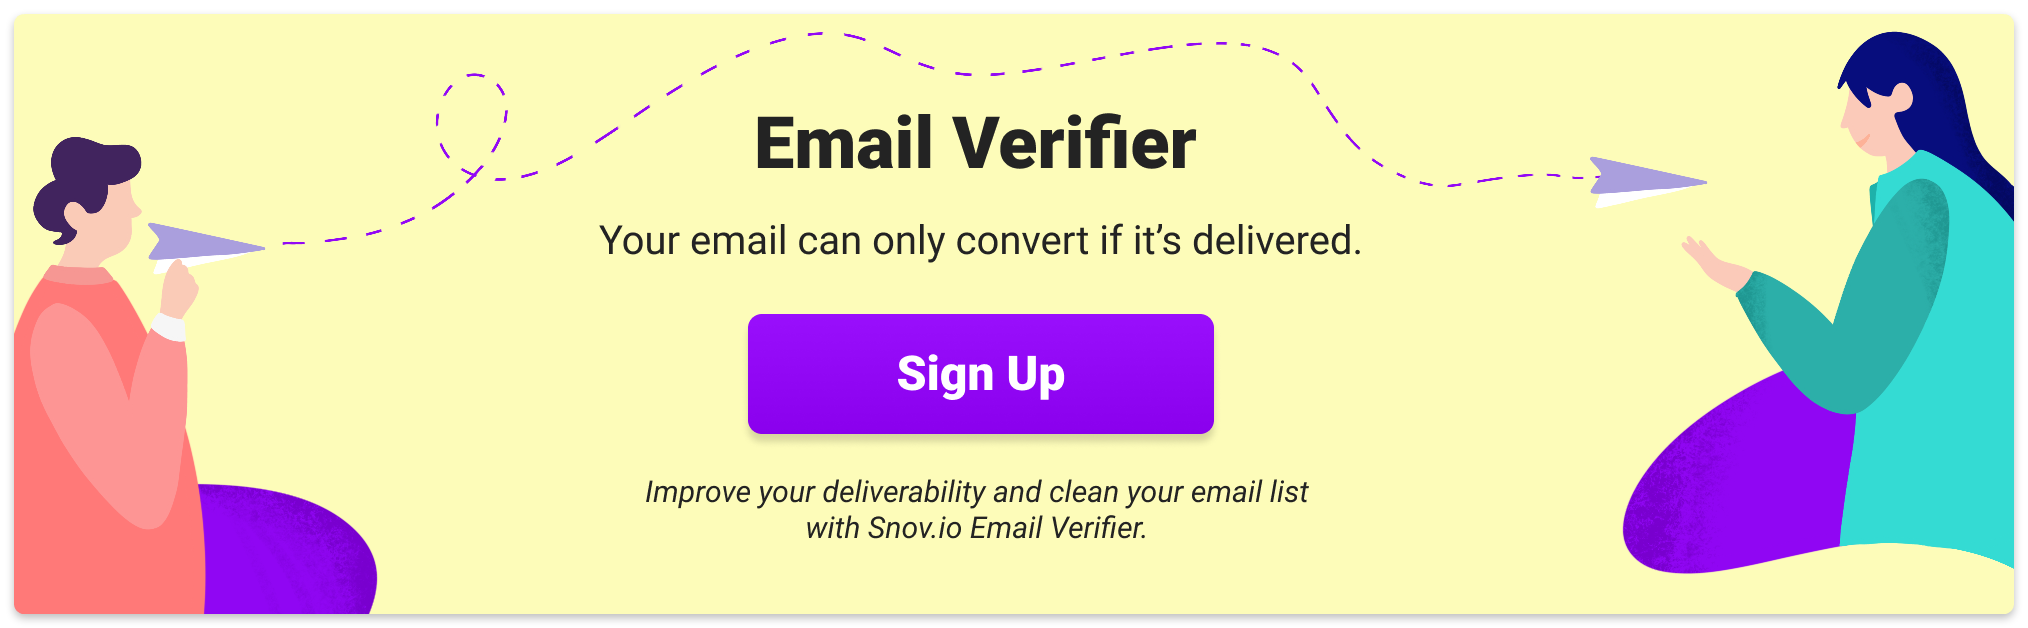 Email verifier free